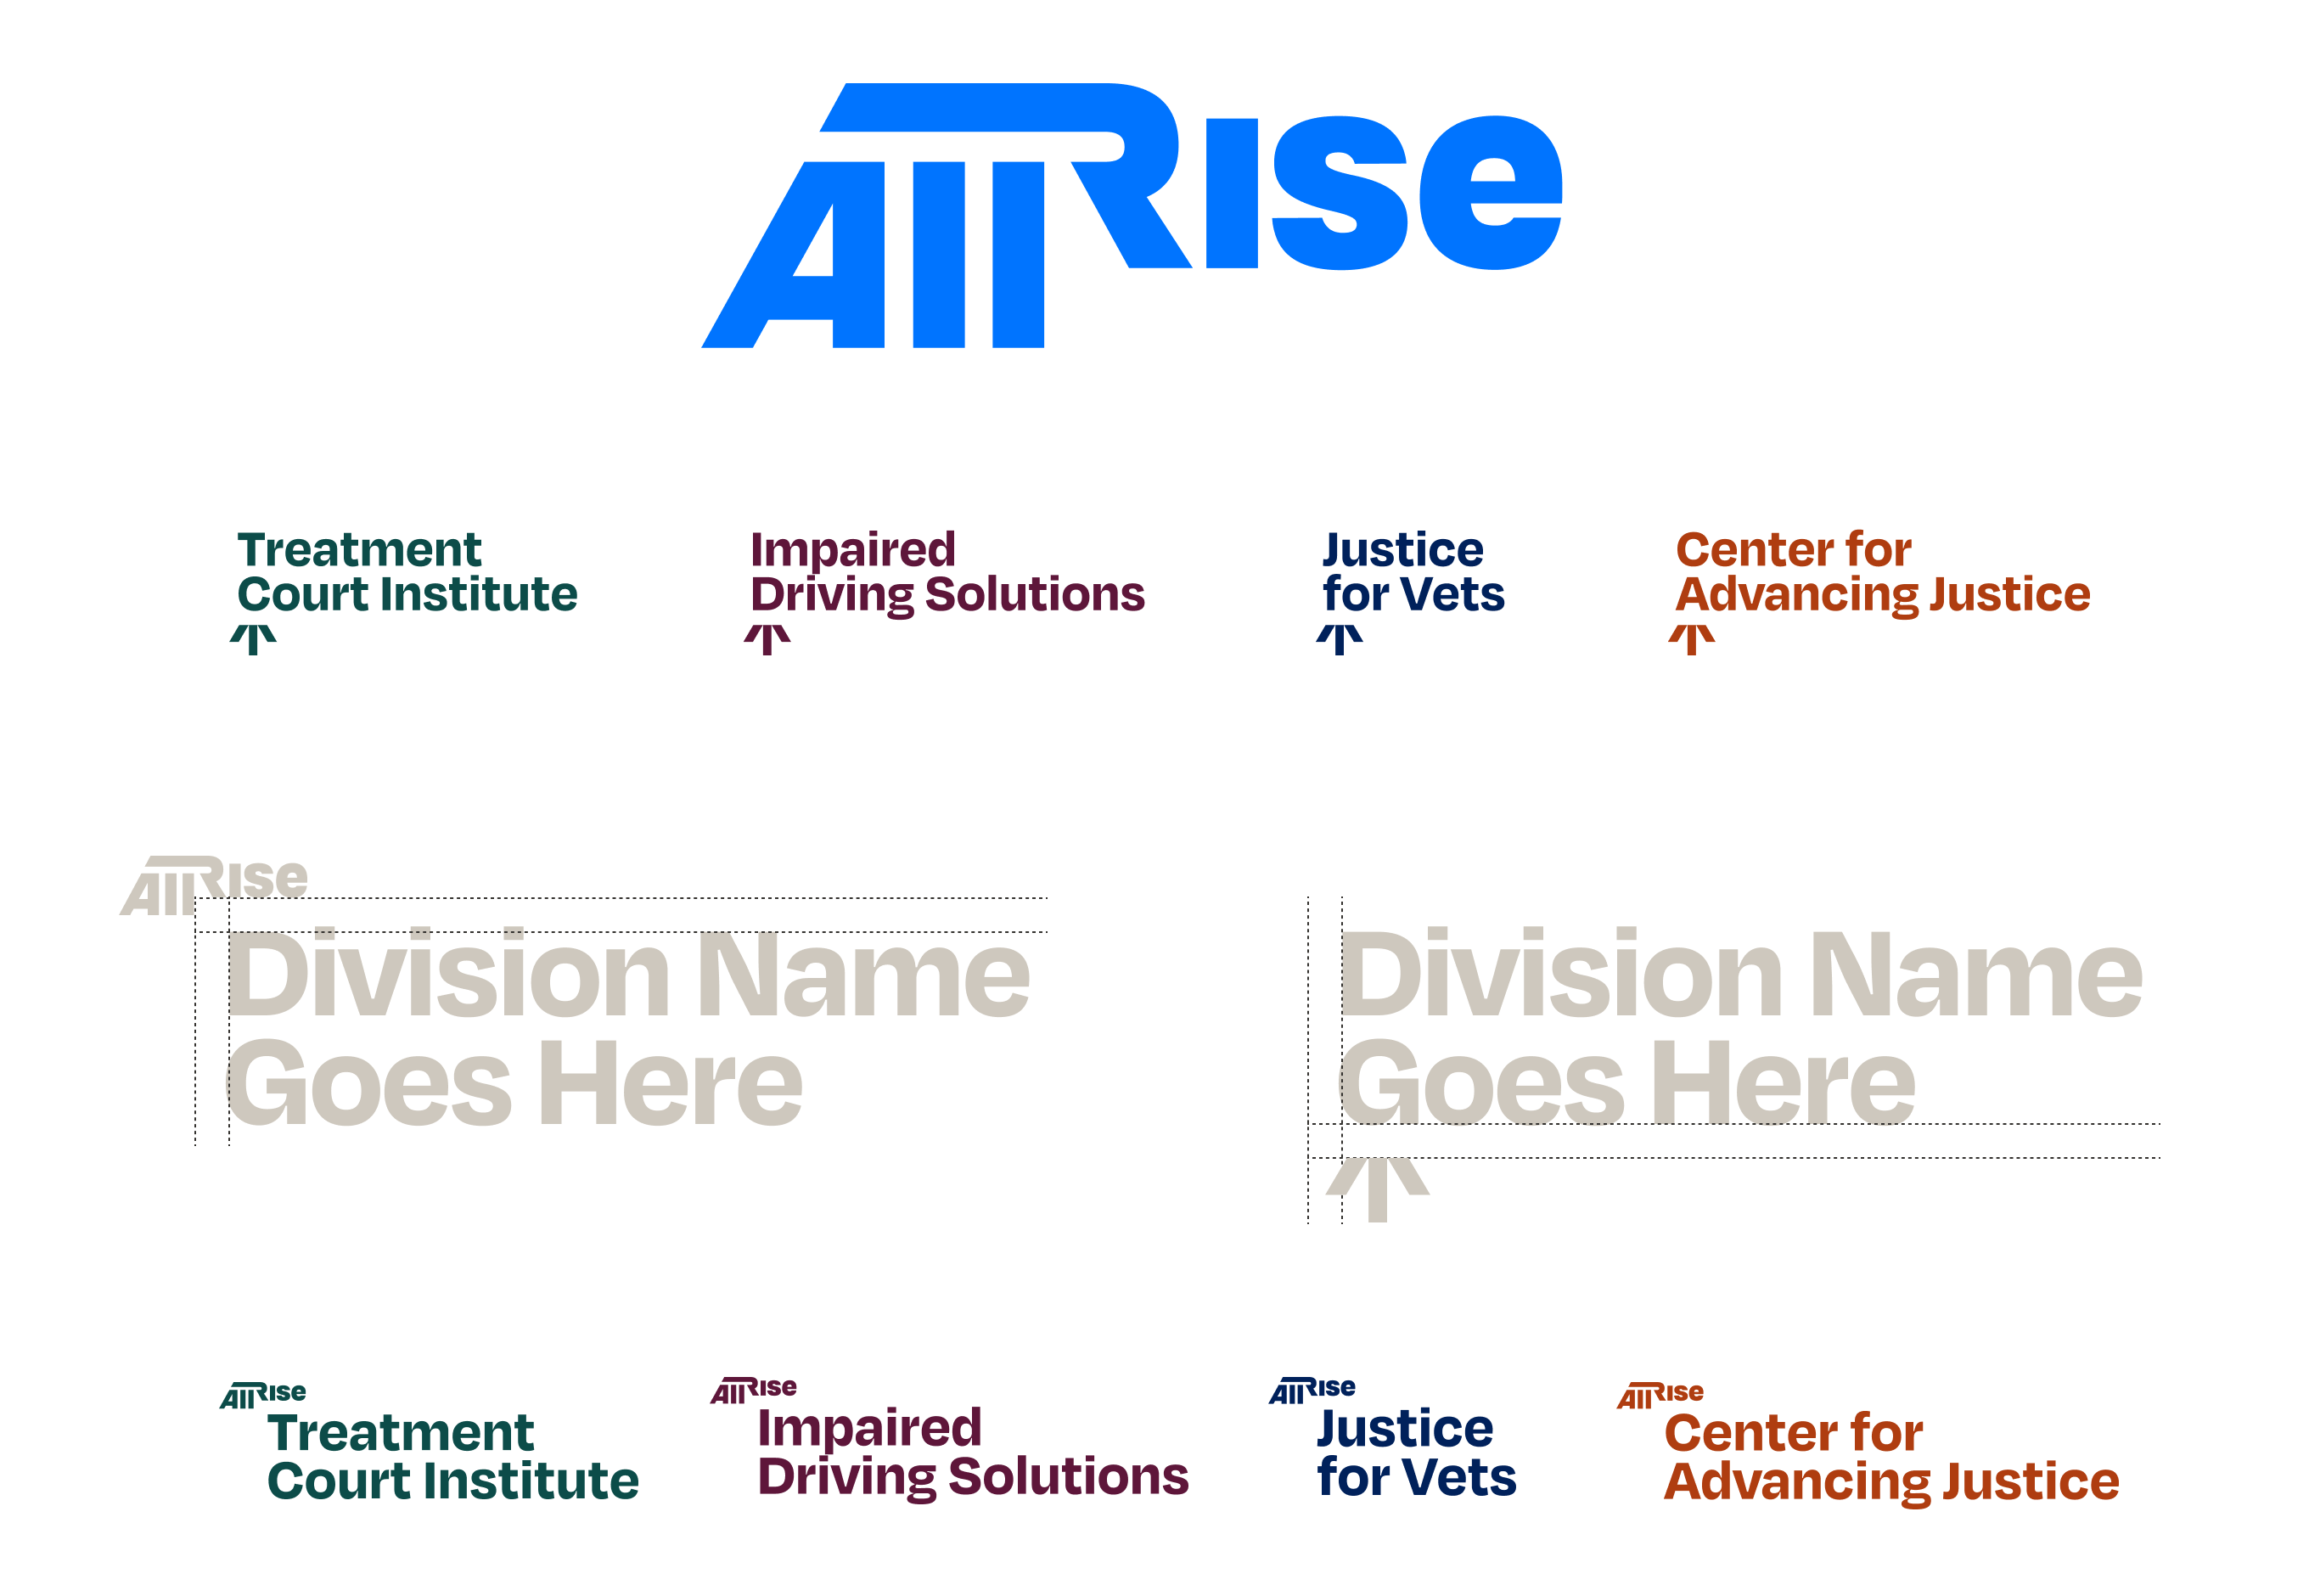 Showcasing the full suite of All Rise divisions, as well as how they're templated for future expansion.